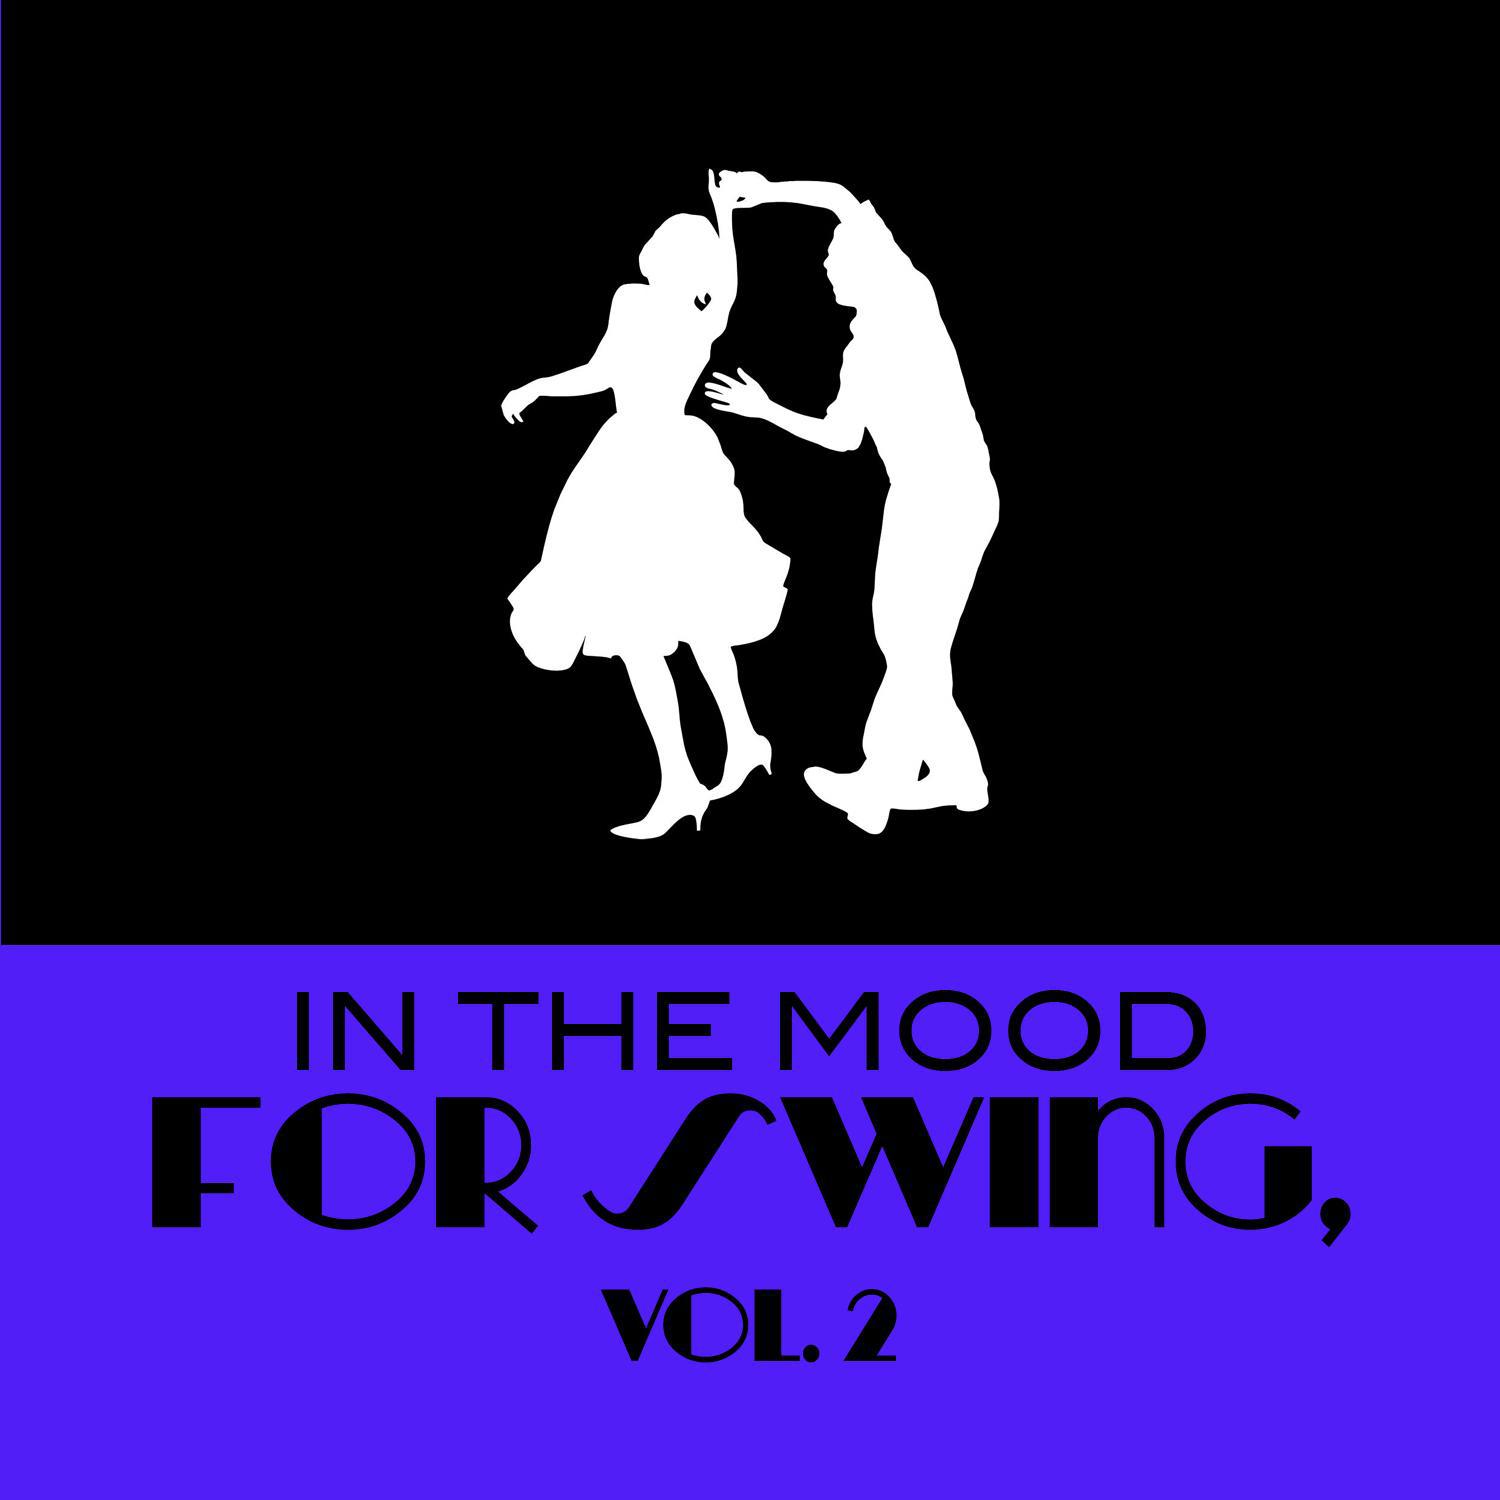 In the Mood for Swing, Vol. 2